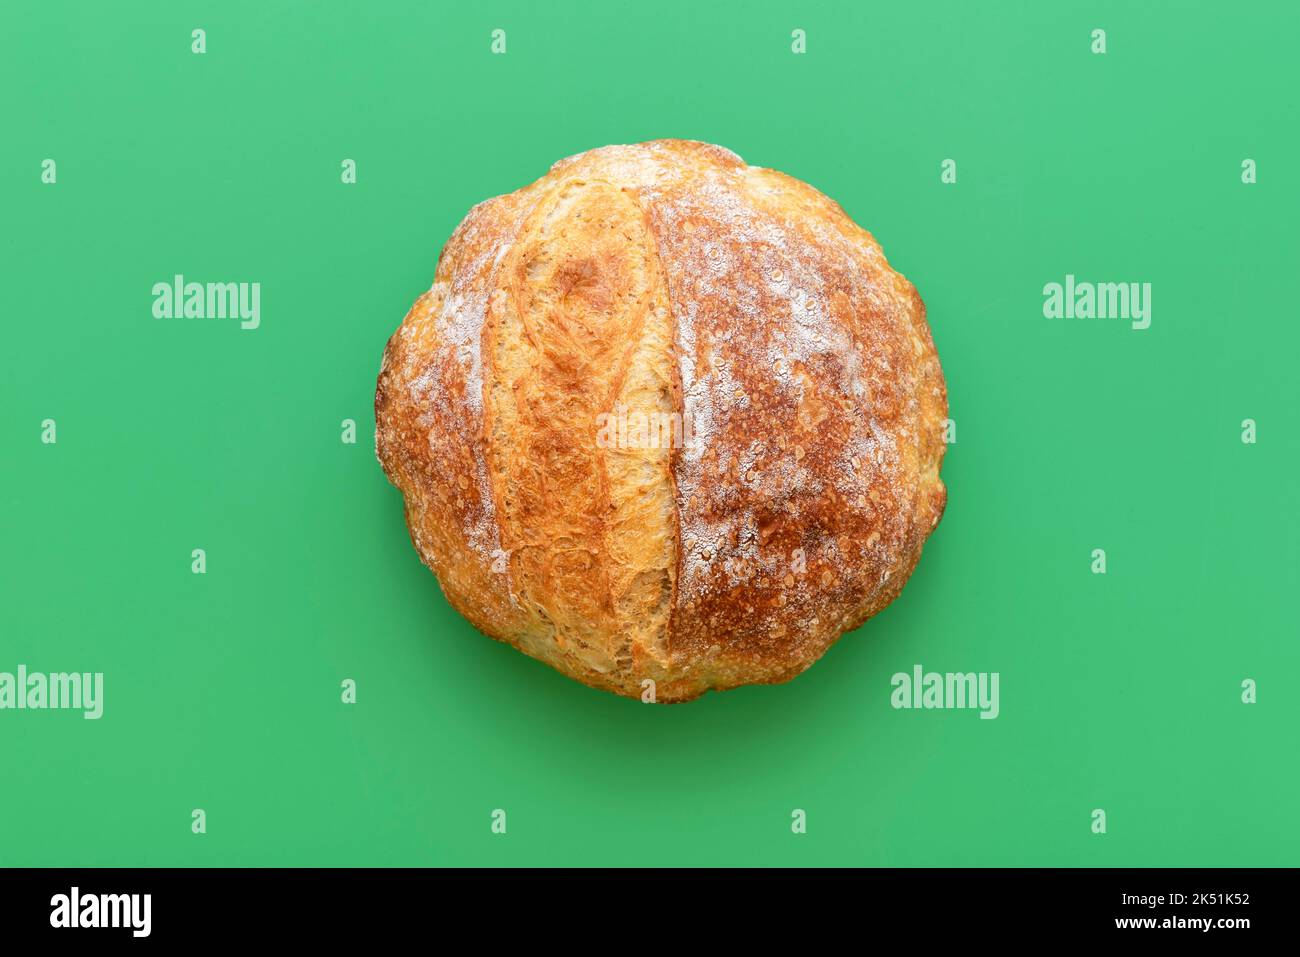 Homemade bread minimalist on a green background. High-angle view with delicious white bread with a golden crust. Stock Photo